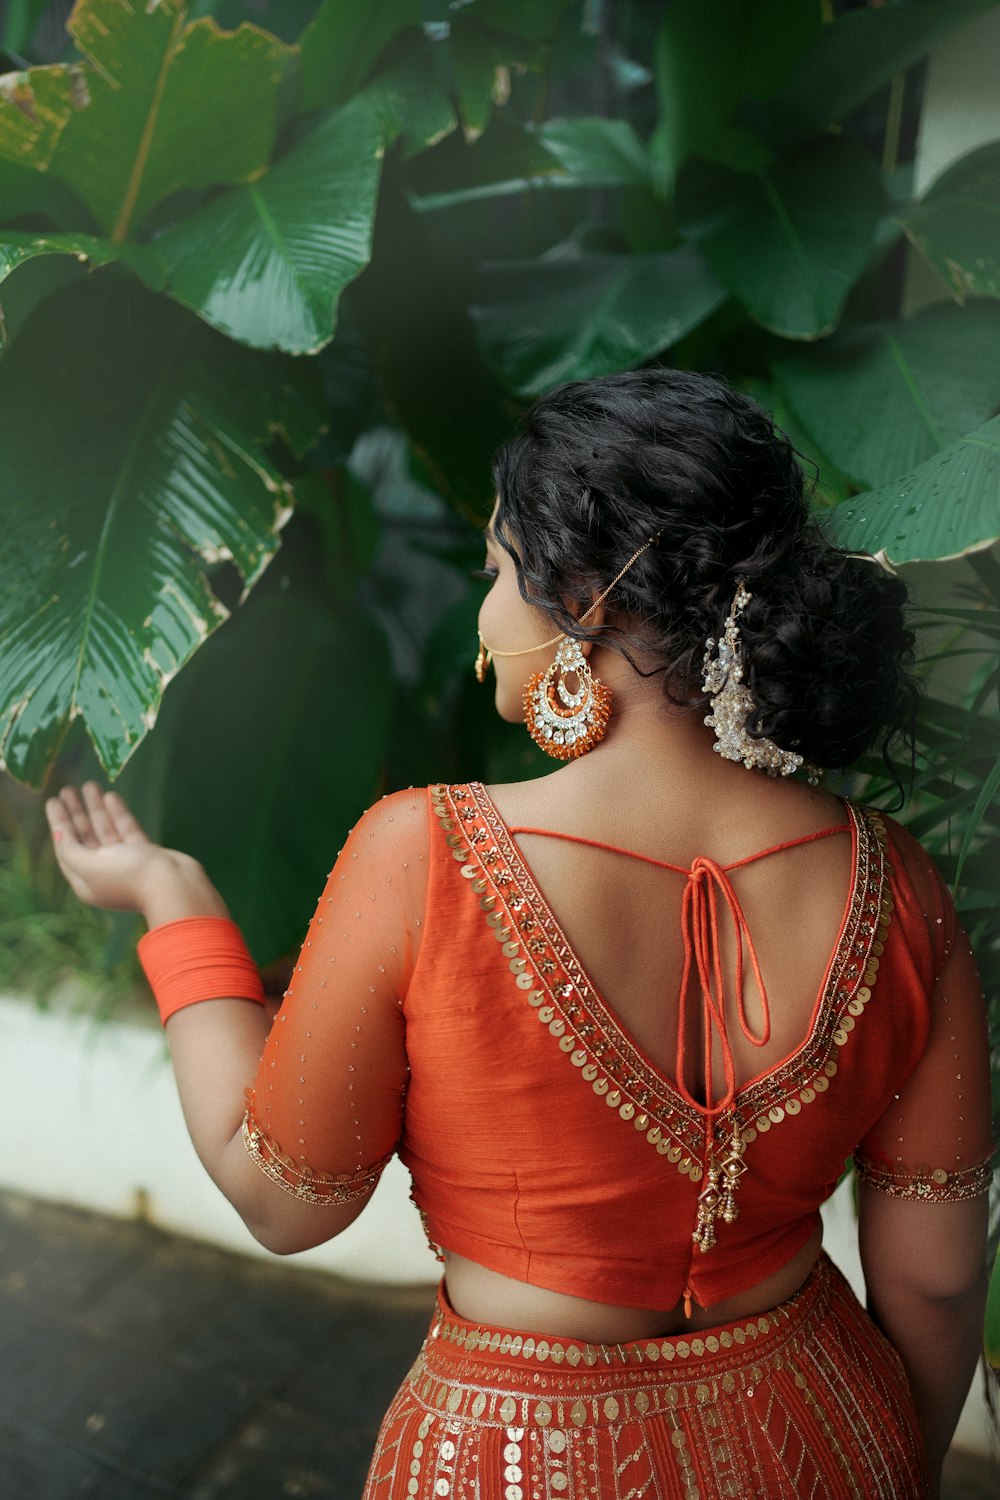 a woman in an orange lehenga standing in front of a plant